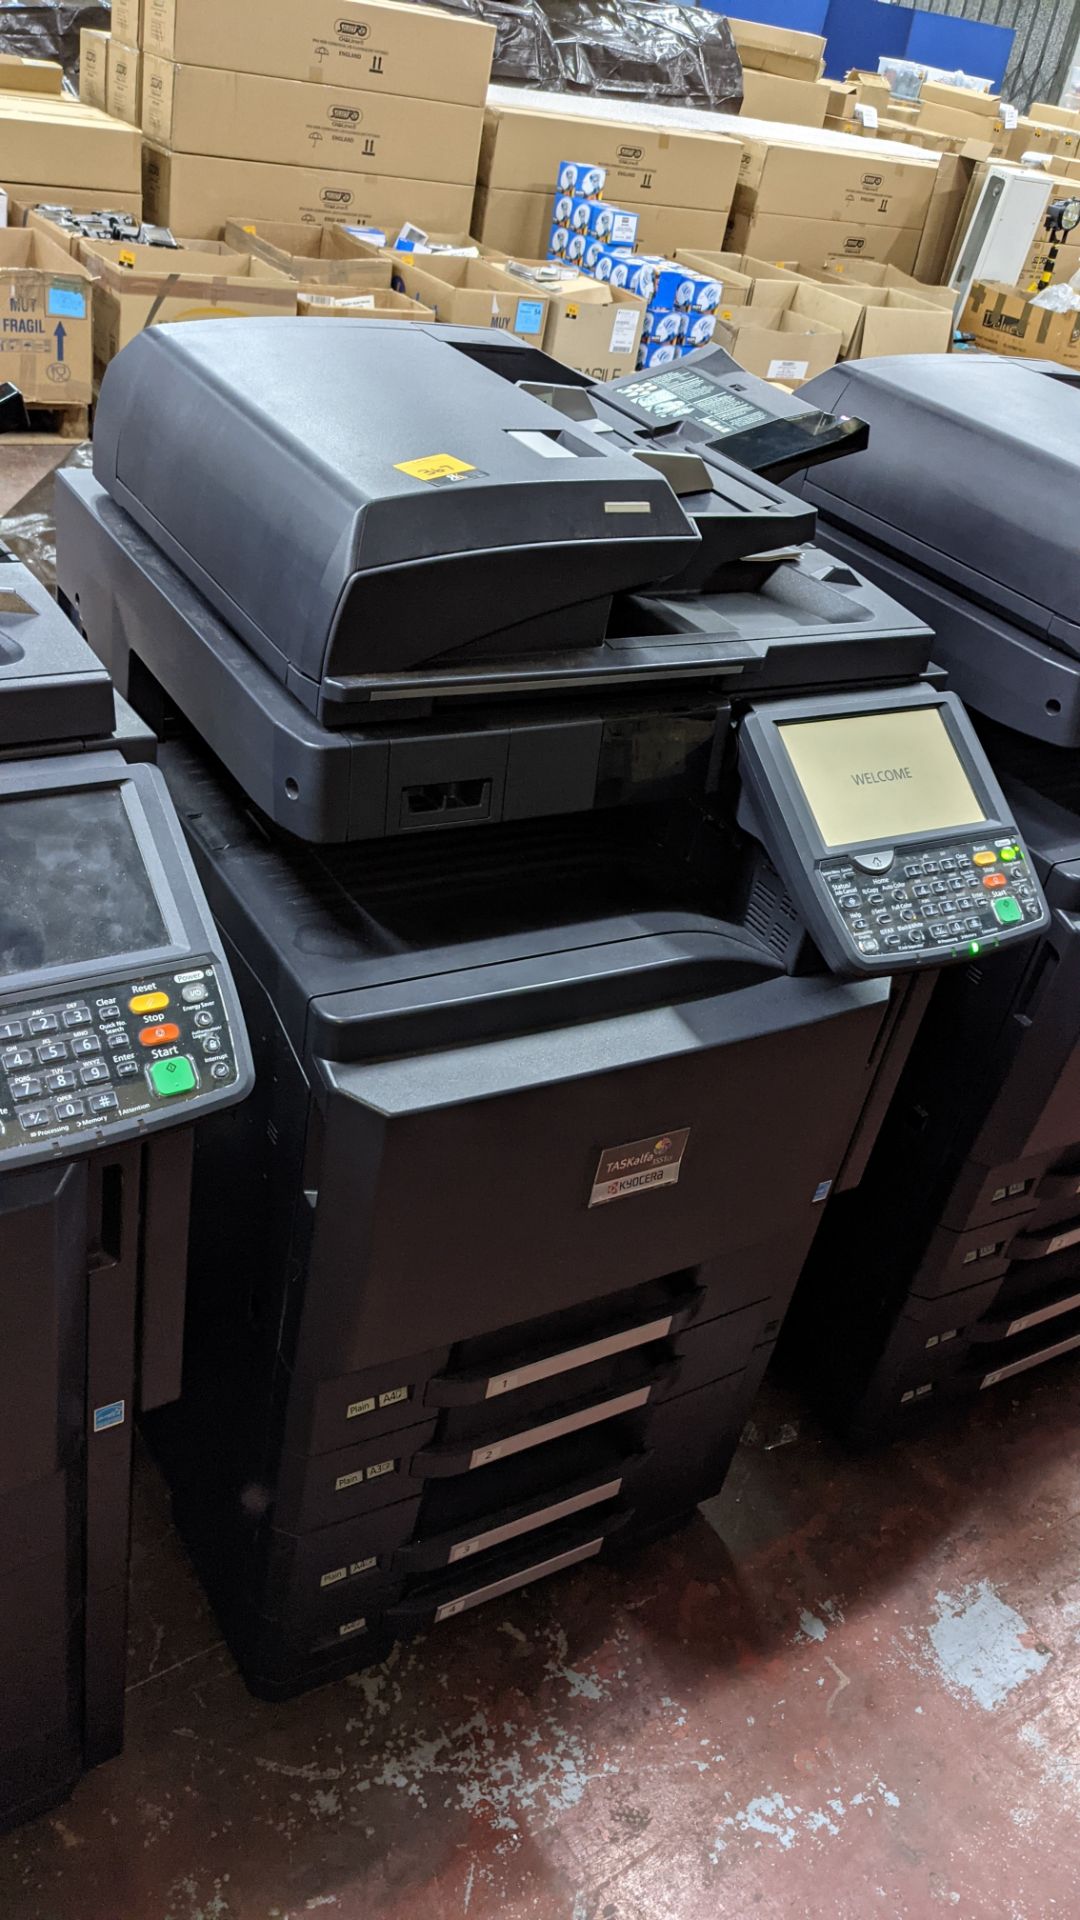 Kyocera Taskalfa 3551ci floor standing copier with 4 paper cassettes, ADF, manual document feed, etc